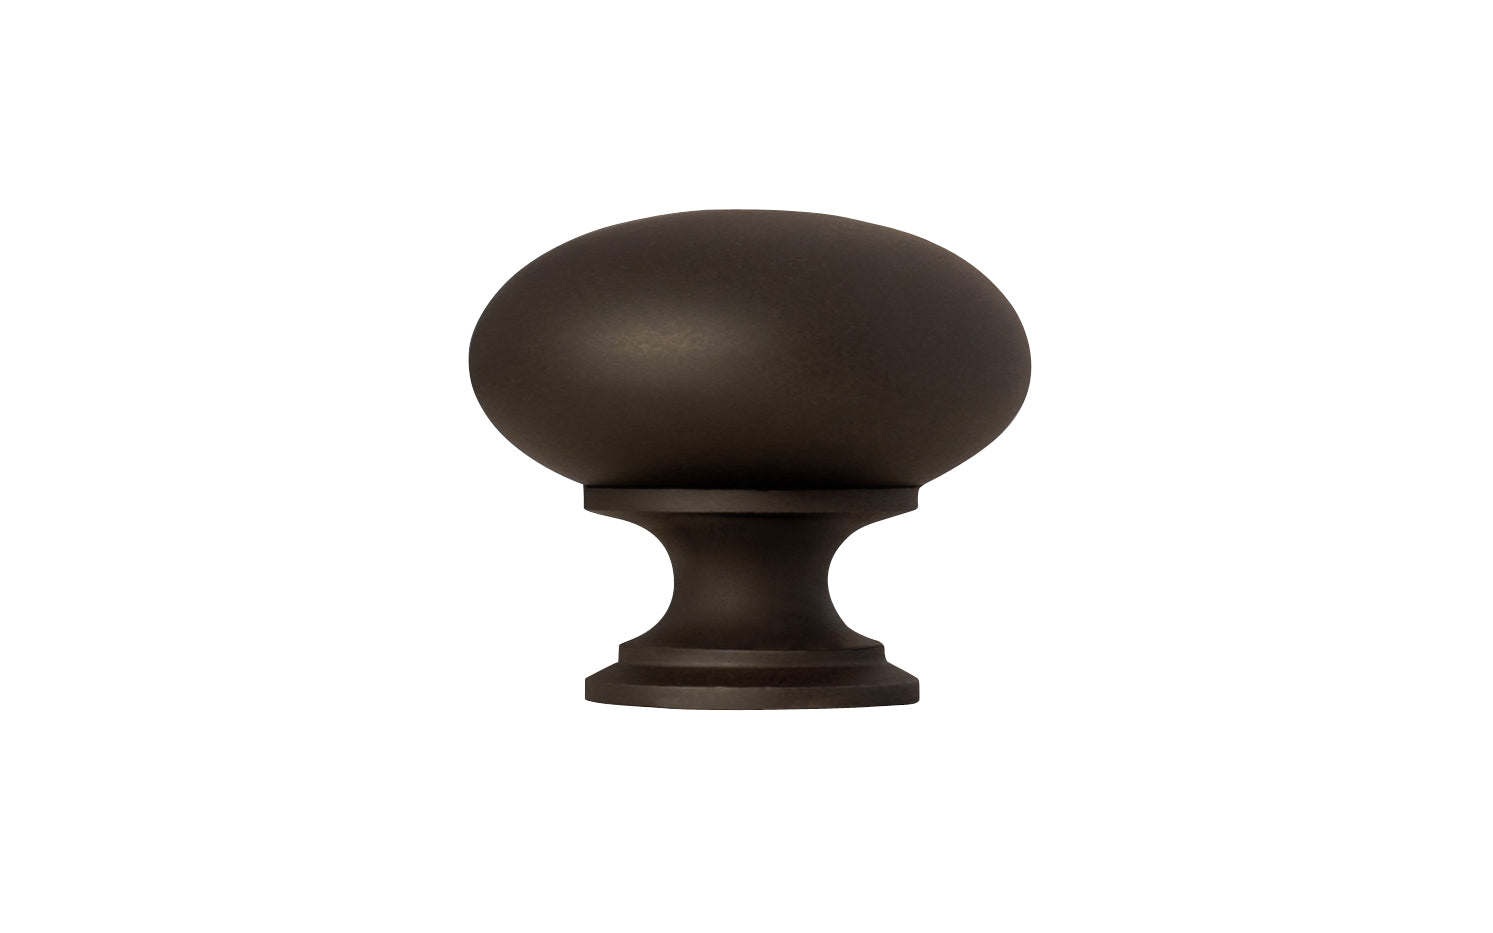 Vintage-style Hardware · Traditional & Classic Brass Knob with an Oil Rubbed Bronze Finish. 1